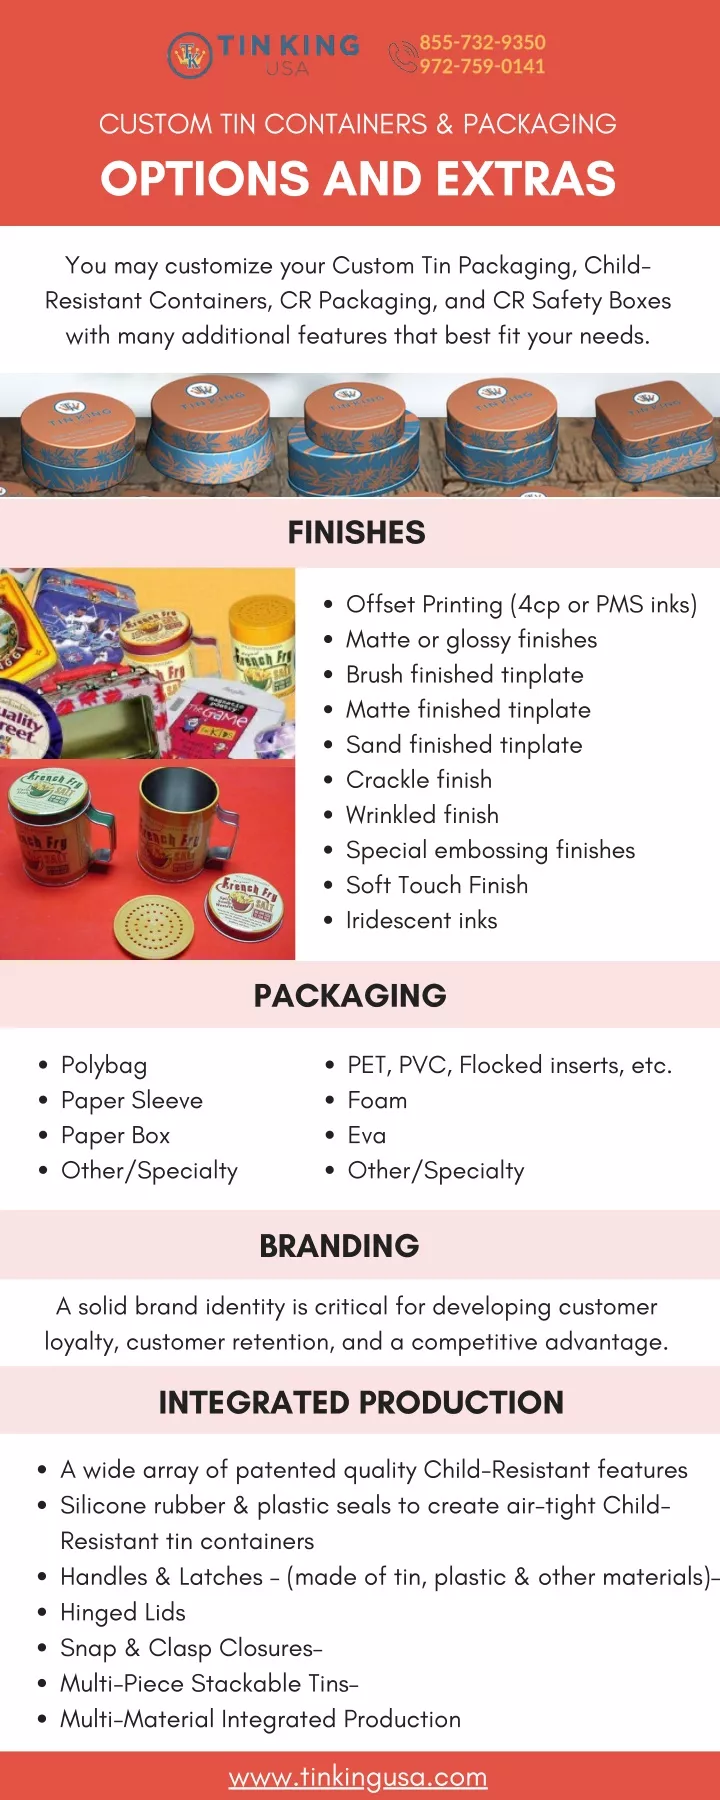 custom tin containers packaging options and extras